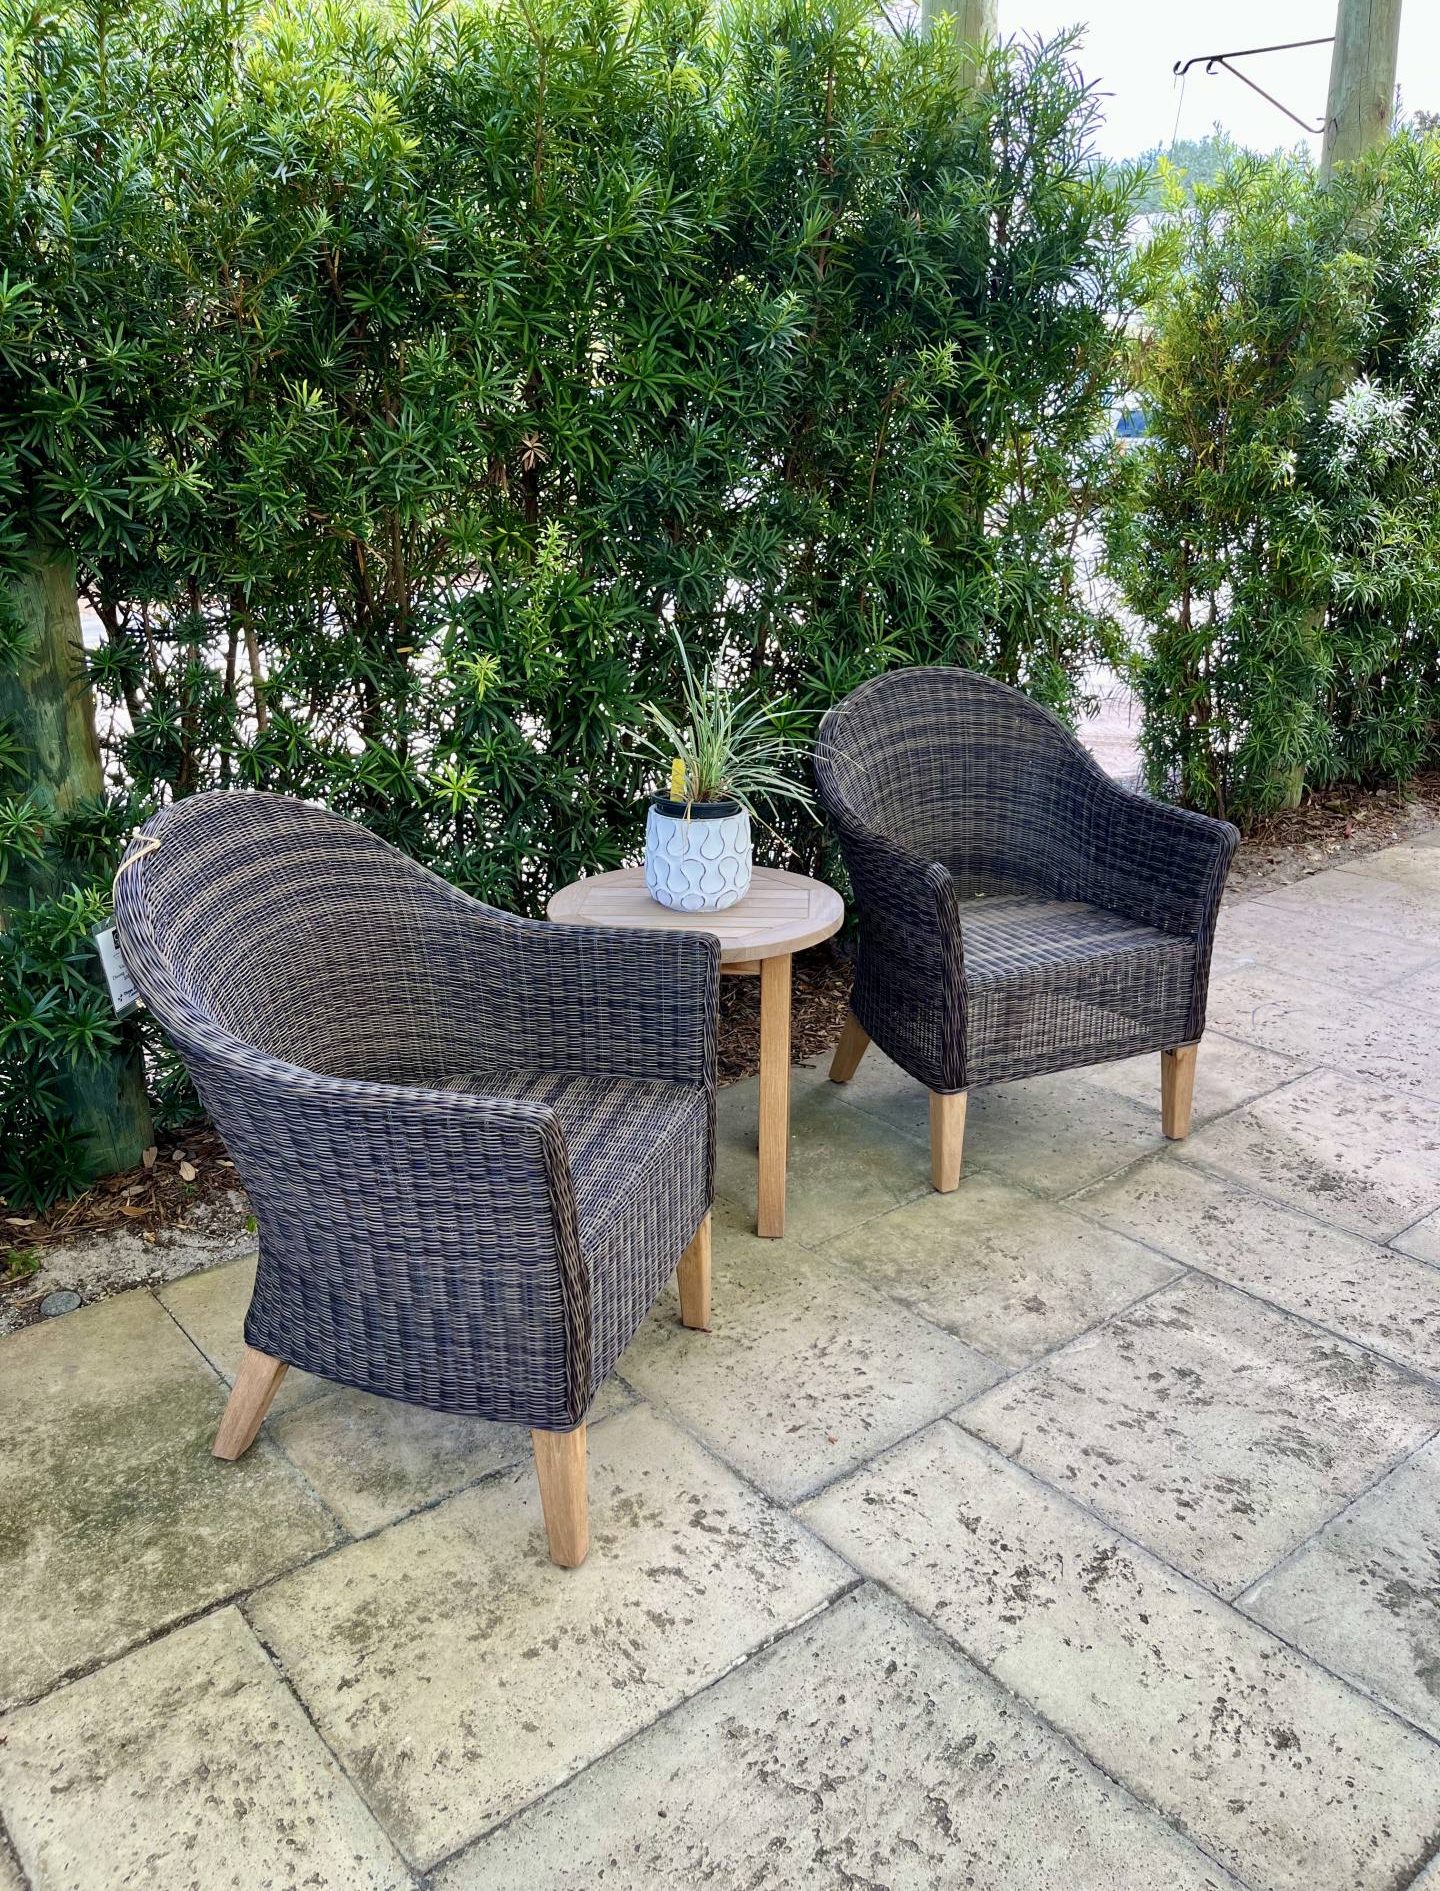 Outdoor Furniture at Clay30a Gardens